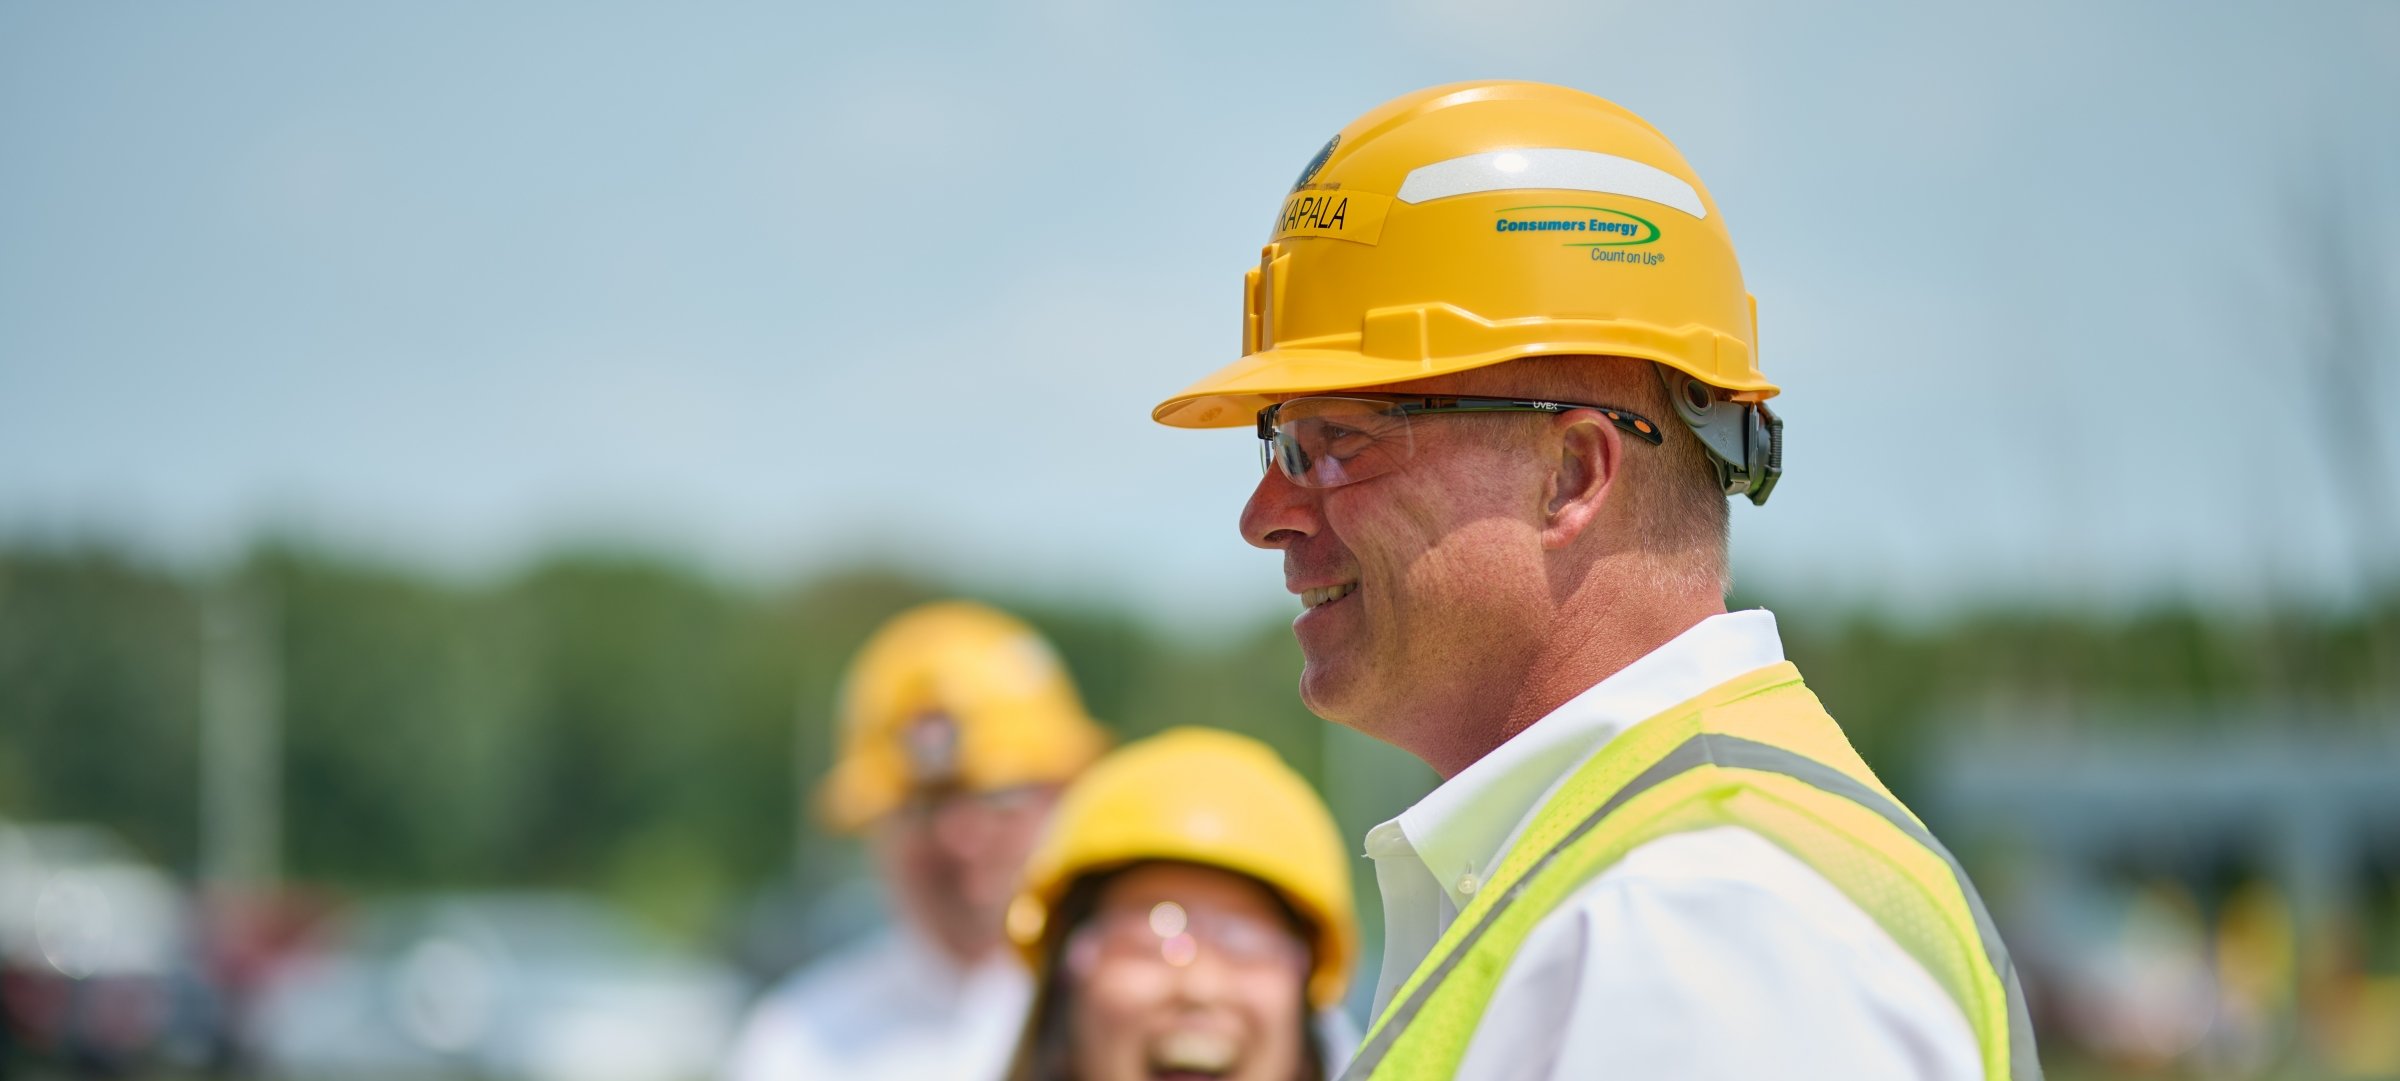 Man in profile wearing a Consumers Energy hardhat.